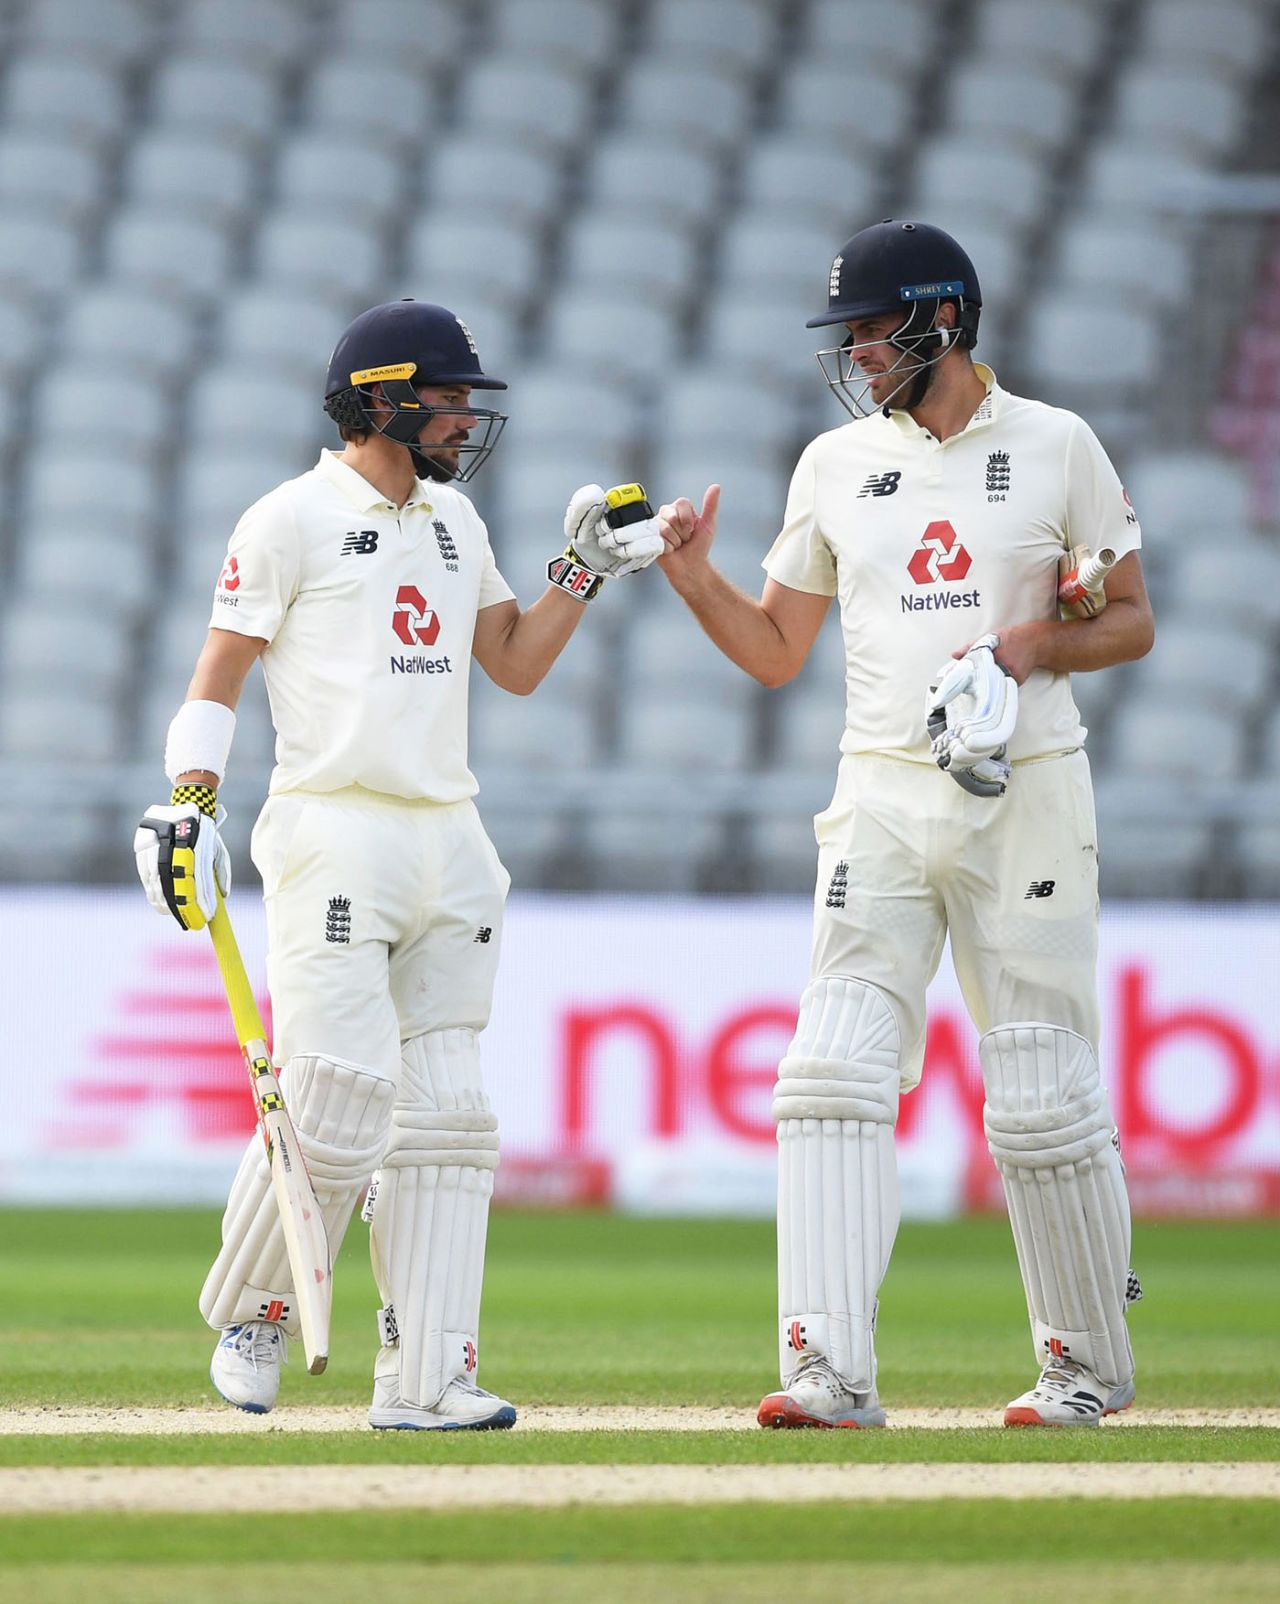 Rory Burns and Dom Sibley put on a century opening stand, England v West Indies, 3rd Test, Emirates Old Trafford, 3rd day, July 26, 2020